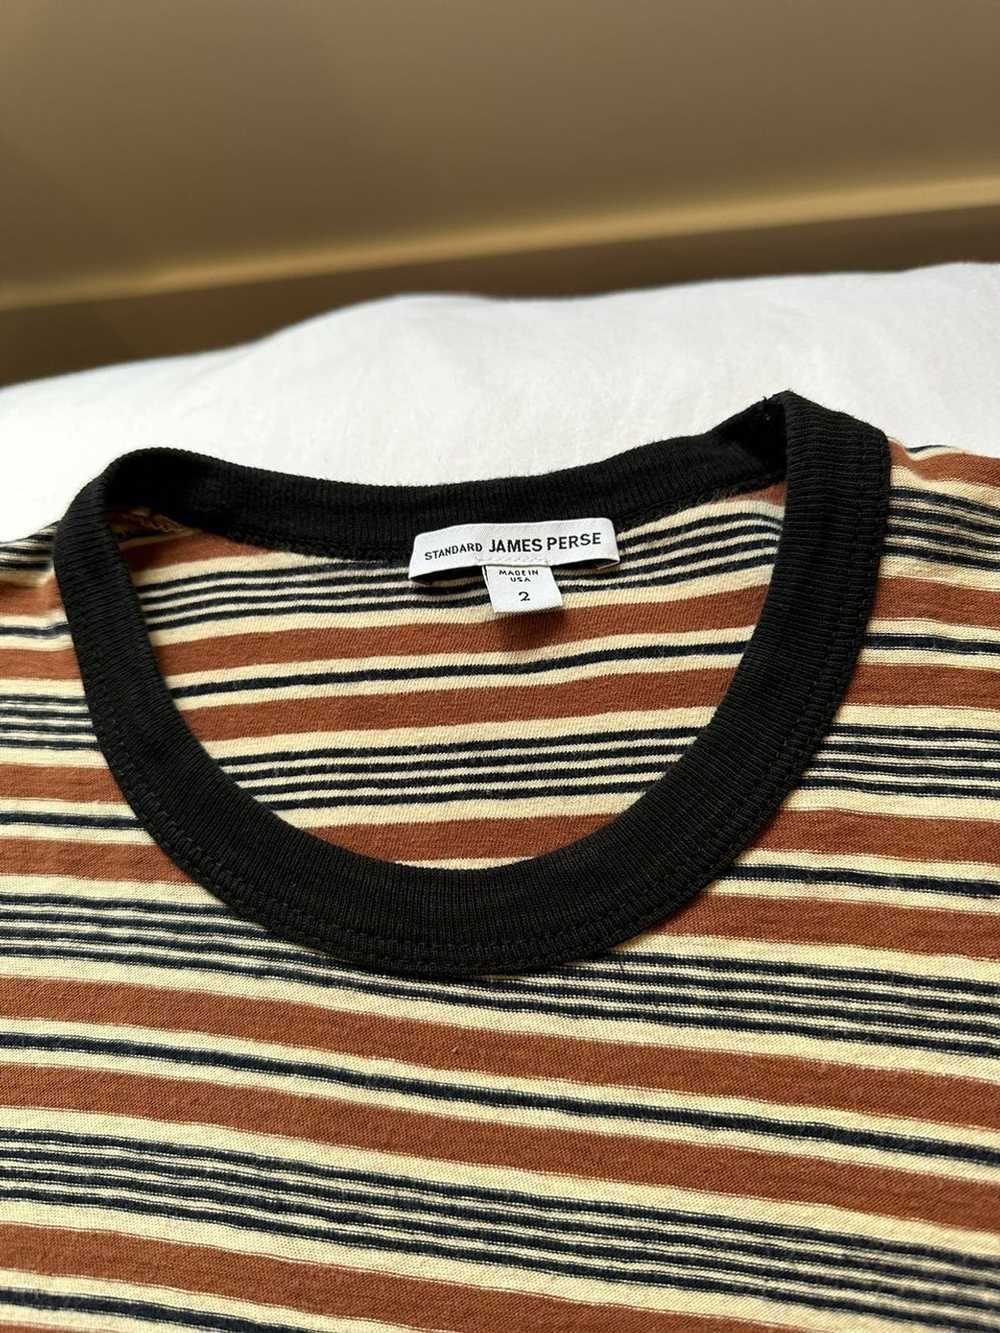 James Perse James Perse striped shirt - image 2